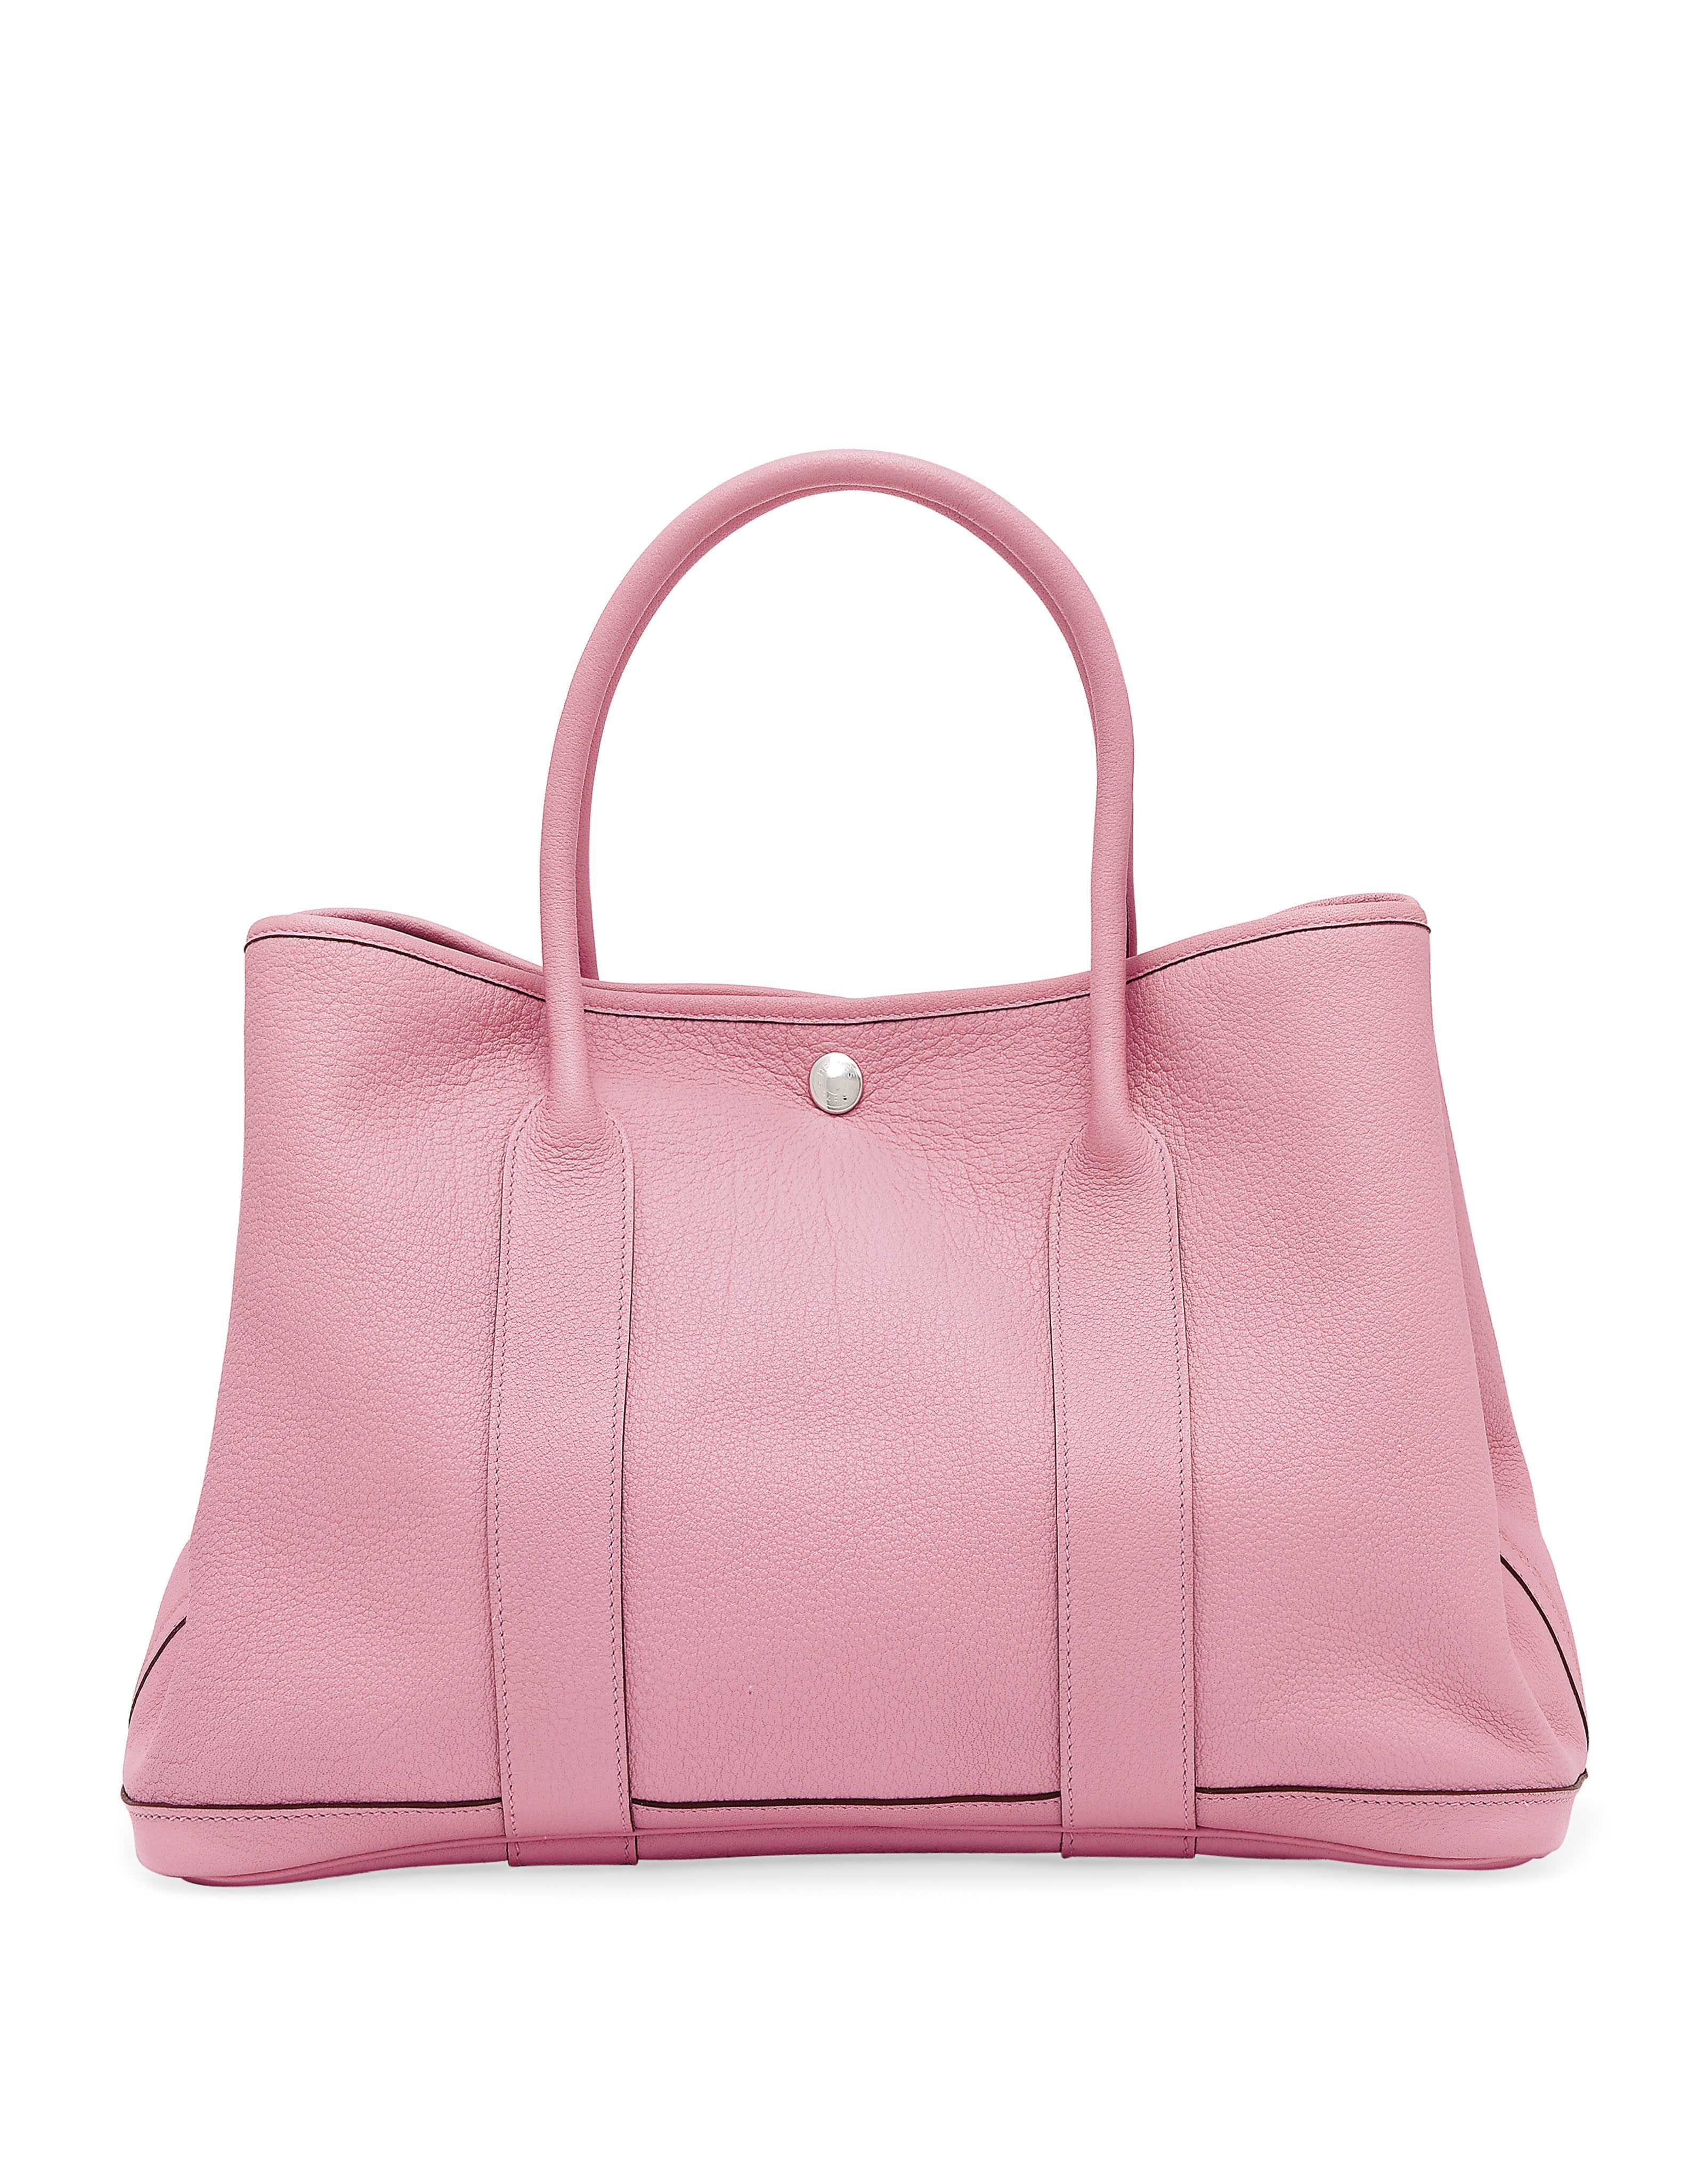 A BABY PINK LEATHER GARDEN PARTY BAG, HERMÈS, 2010 Christie's A BABY ...